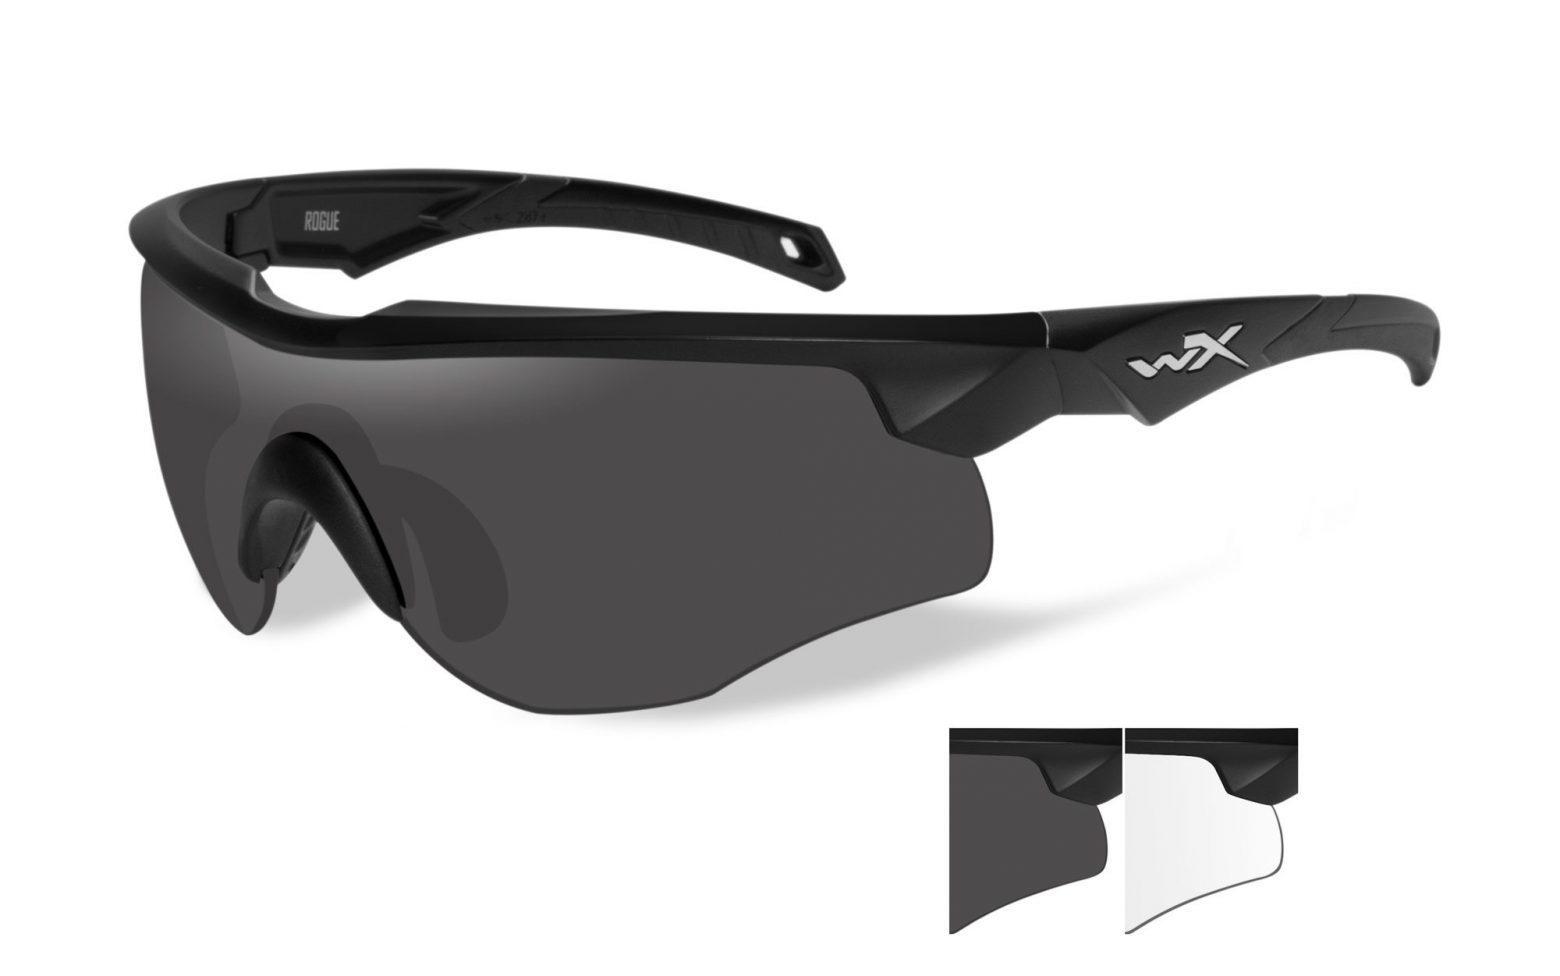 WileyX Rogue Safety ANSI Rated Sunglasses by Wiley X